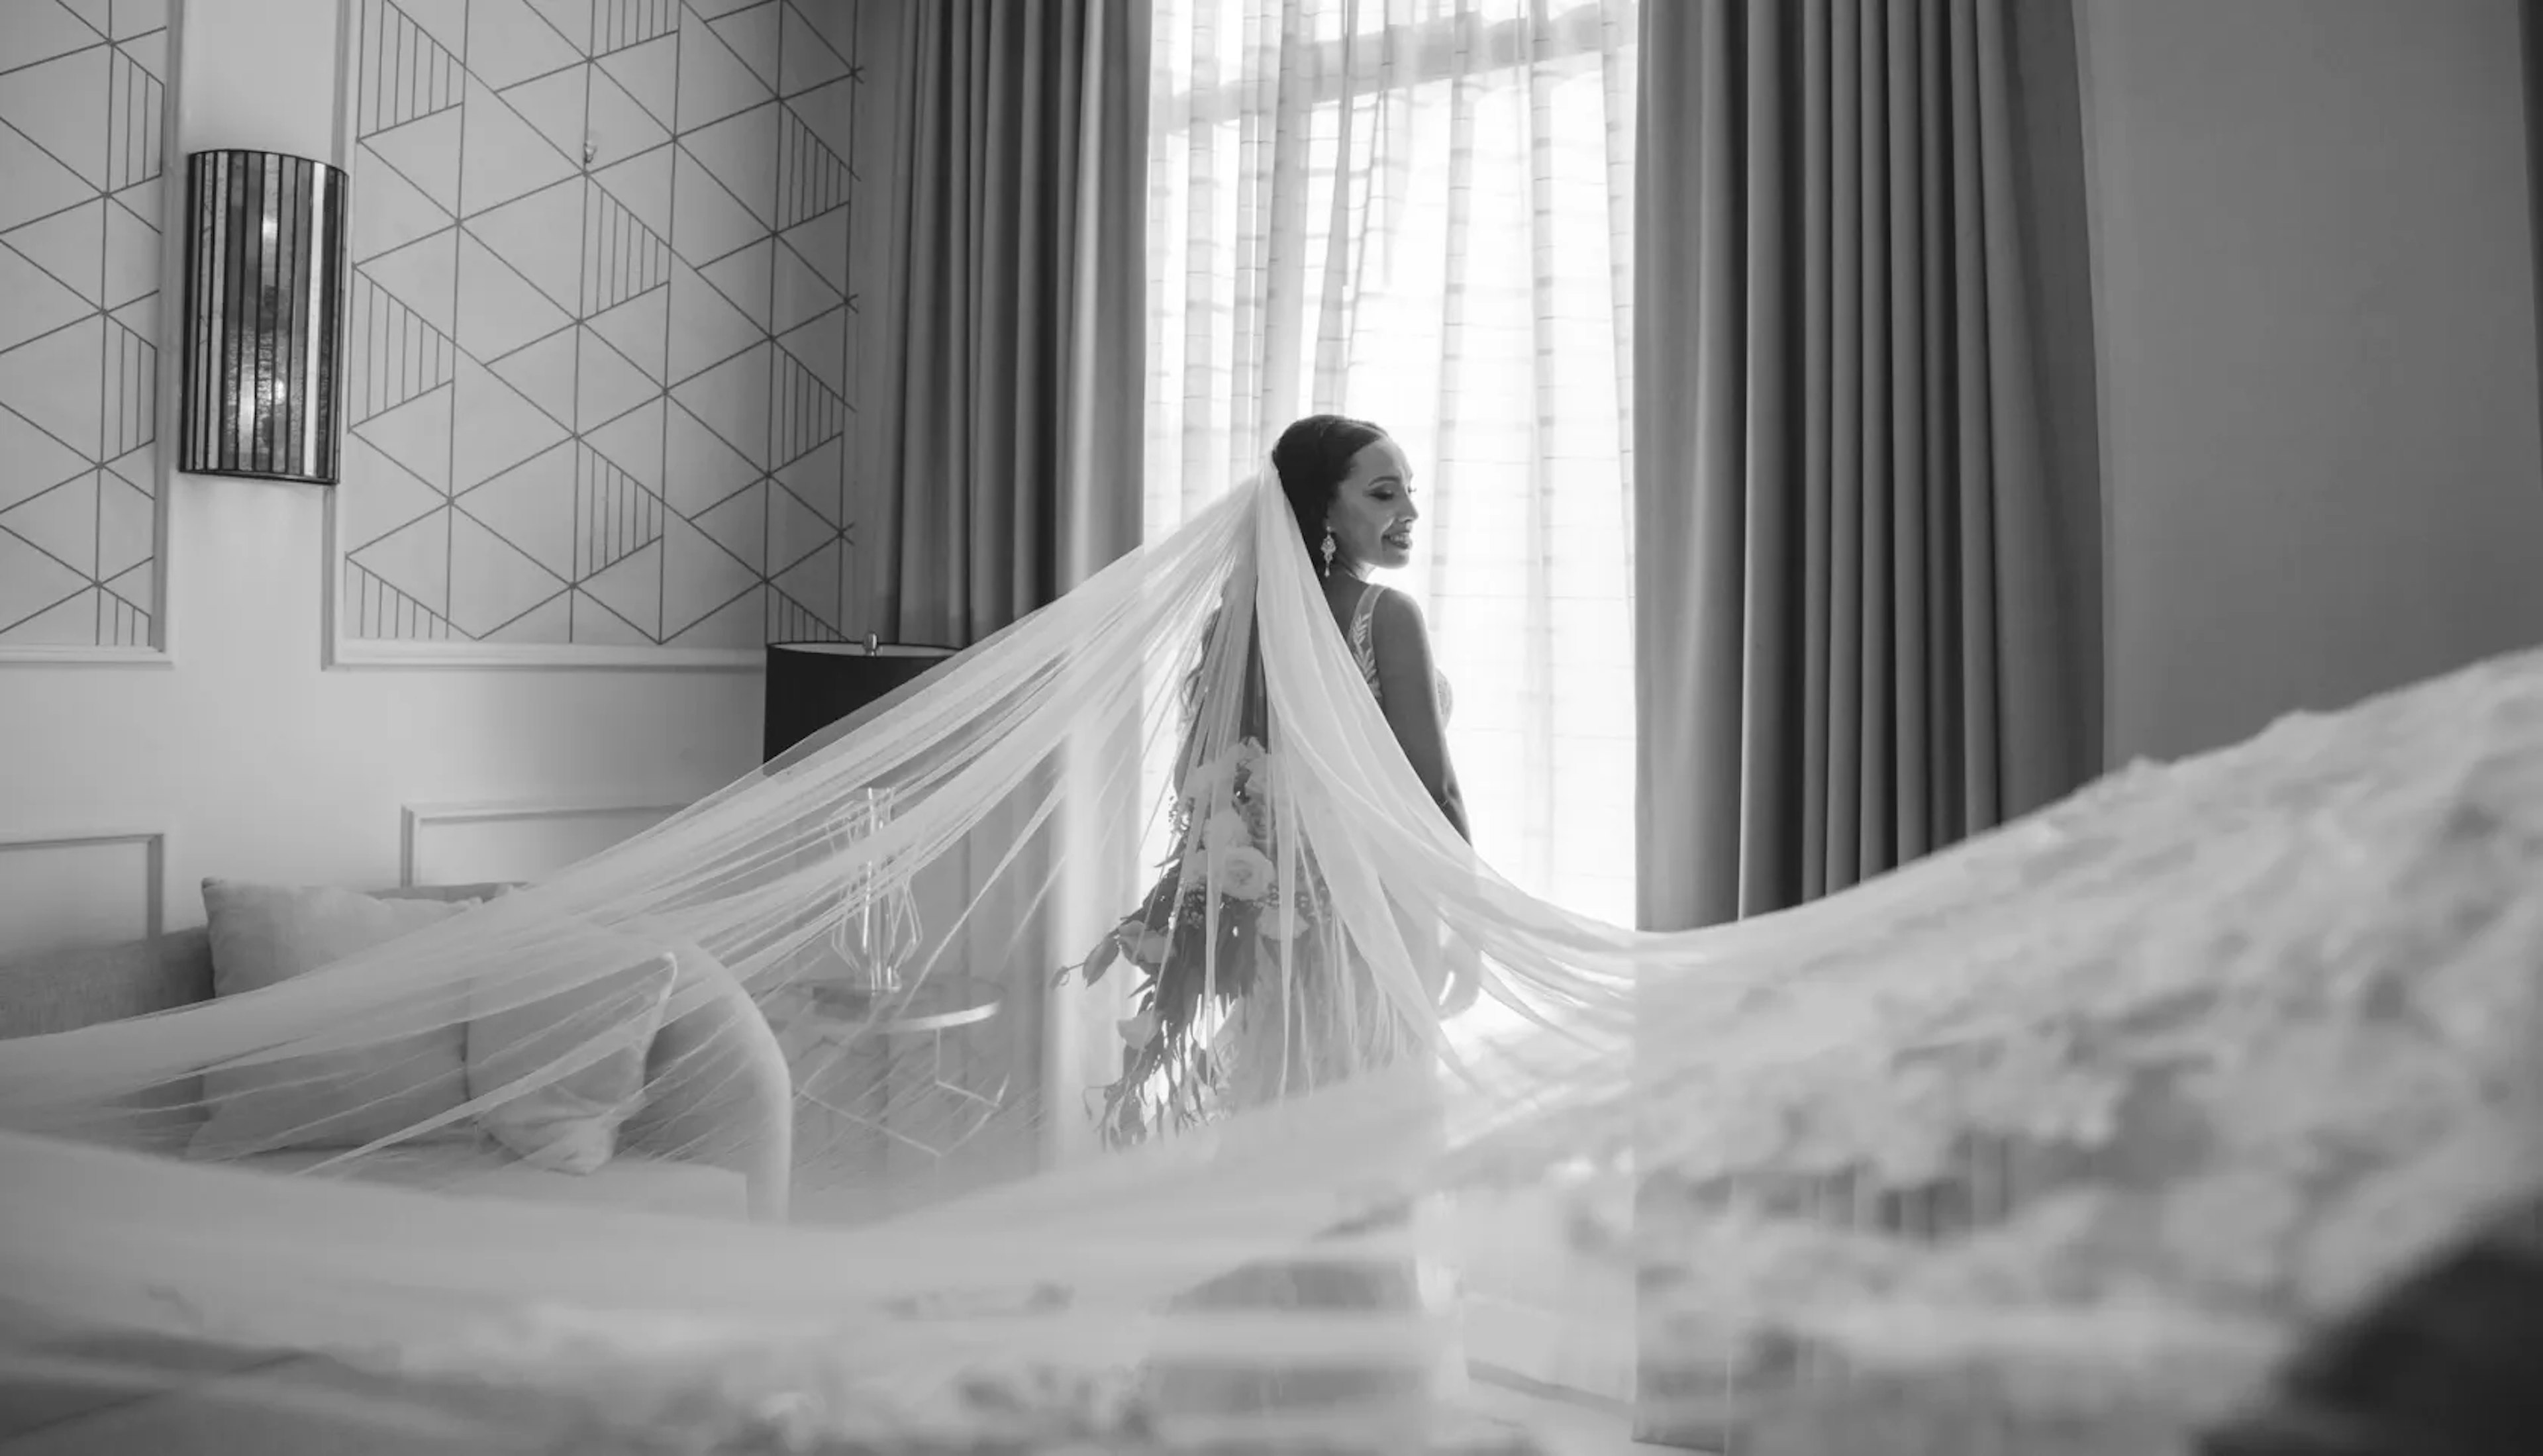 A bride stands poised in a monochrome room, her long veil flowing gracefully around her, with the light from a large window casting soft shadows and highlighting the elegant pattern of her lace dress.